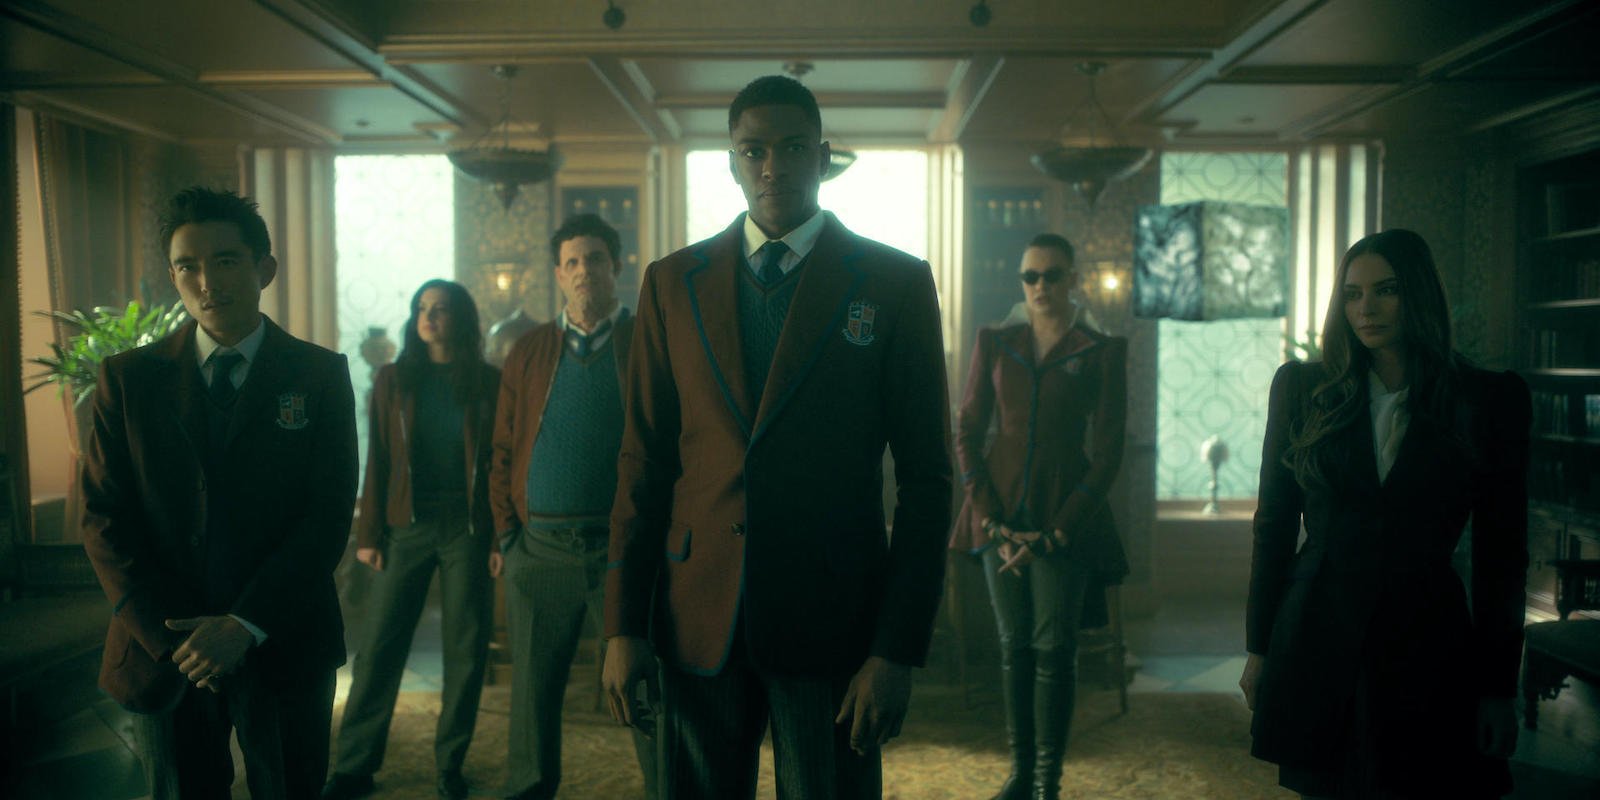 Ben Hargreeves (Justin H. Min), Jayme (Cazzie David), Alphonso (Jake Epstein), Marcus (Justin Cornwell), Fei (Britne Oldford), Christopher the Green Cube, and Sloane (Genesis Rodriguez) in the Sparrow Academy mansion in 'The Umbrella Academy' Season 3